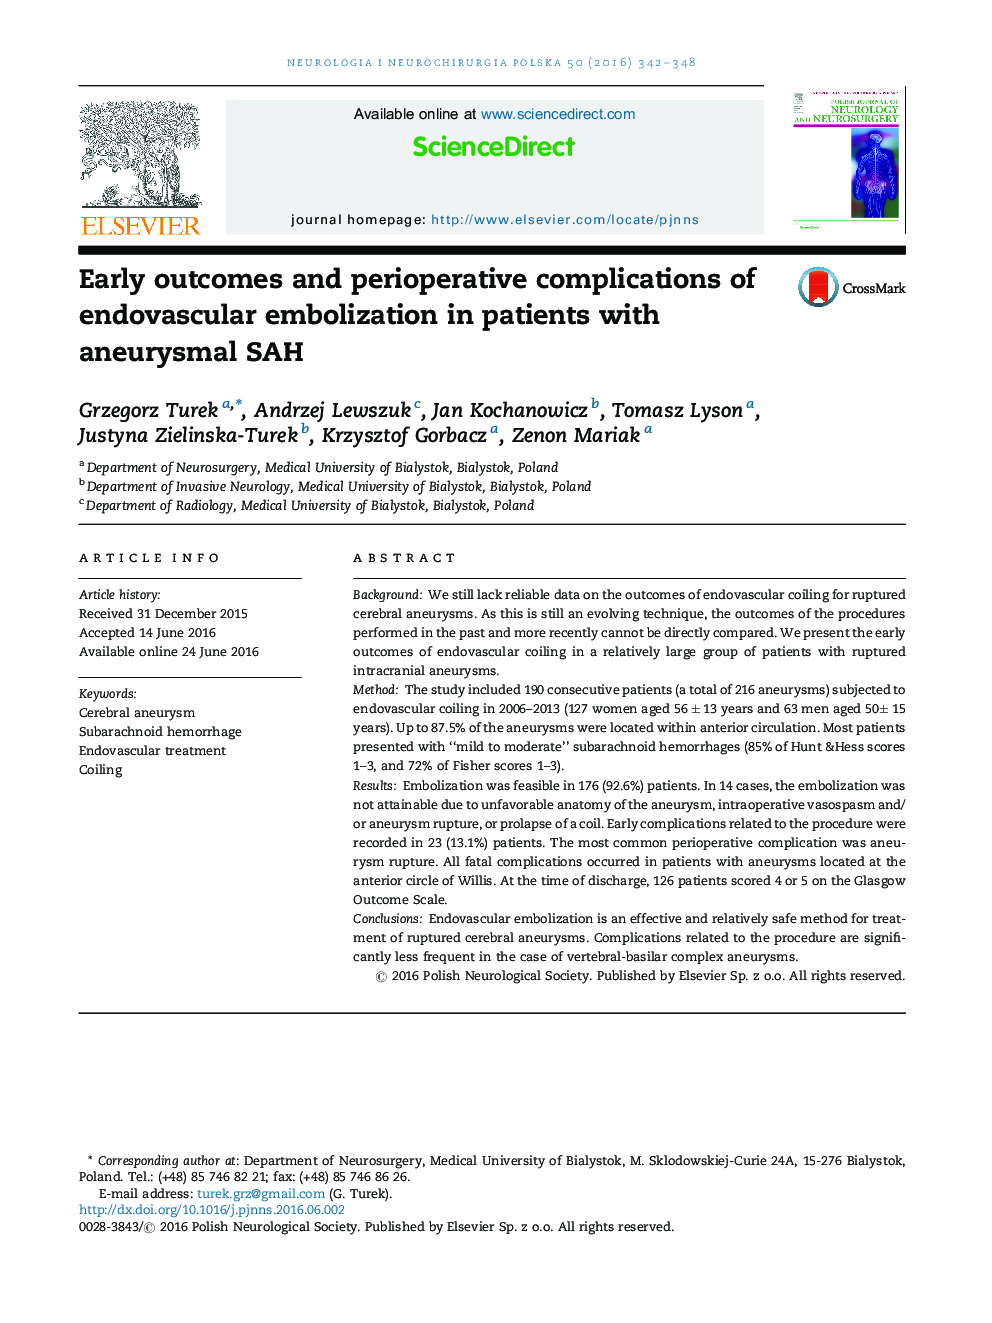 Early outcomes and perioperative complications of endovascular embolization in patients with aneurysmal SAH